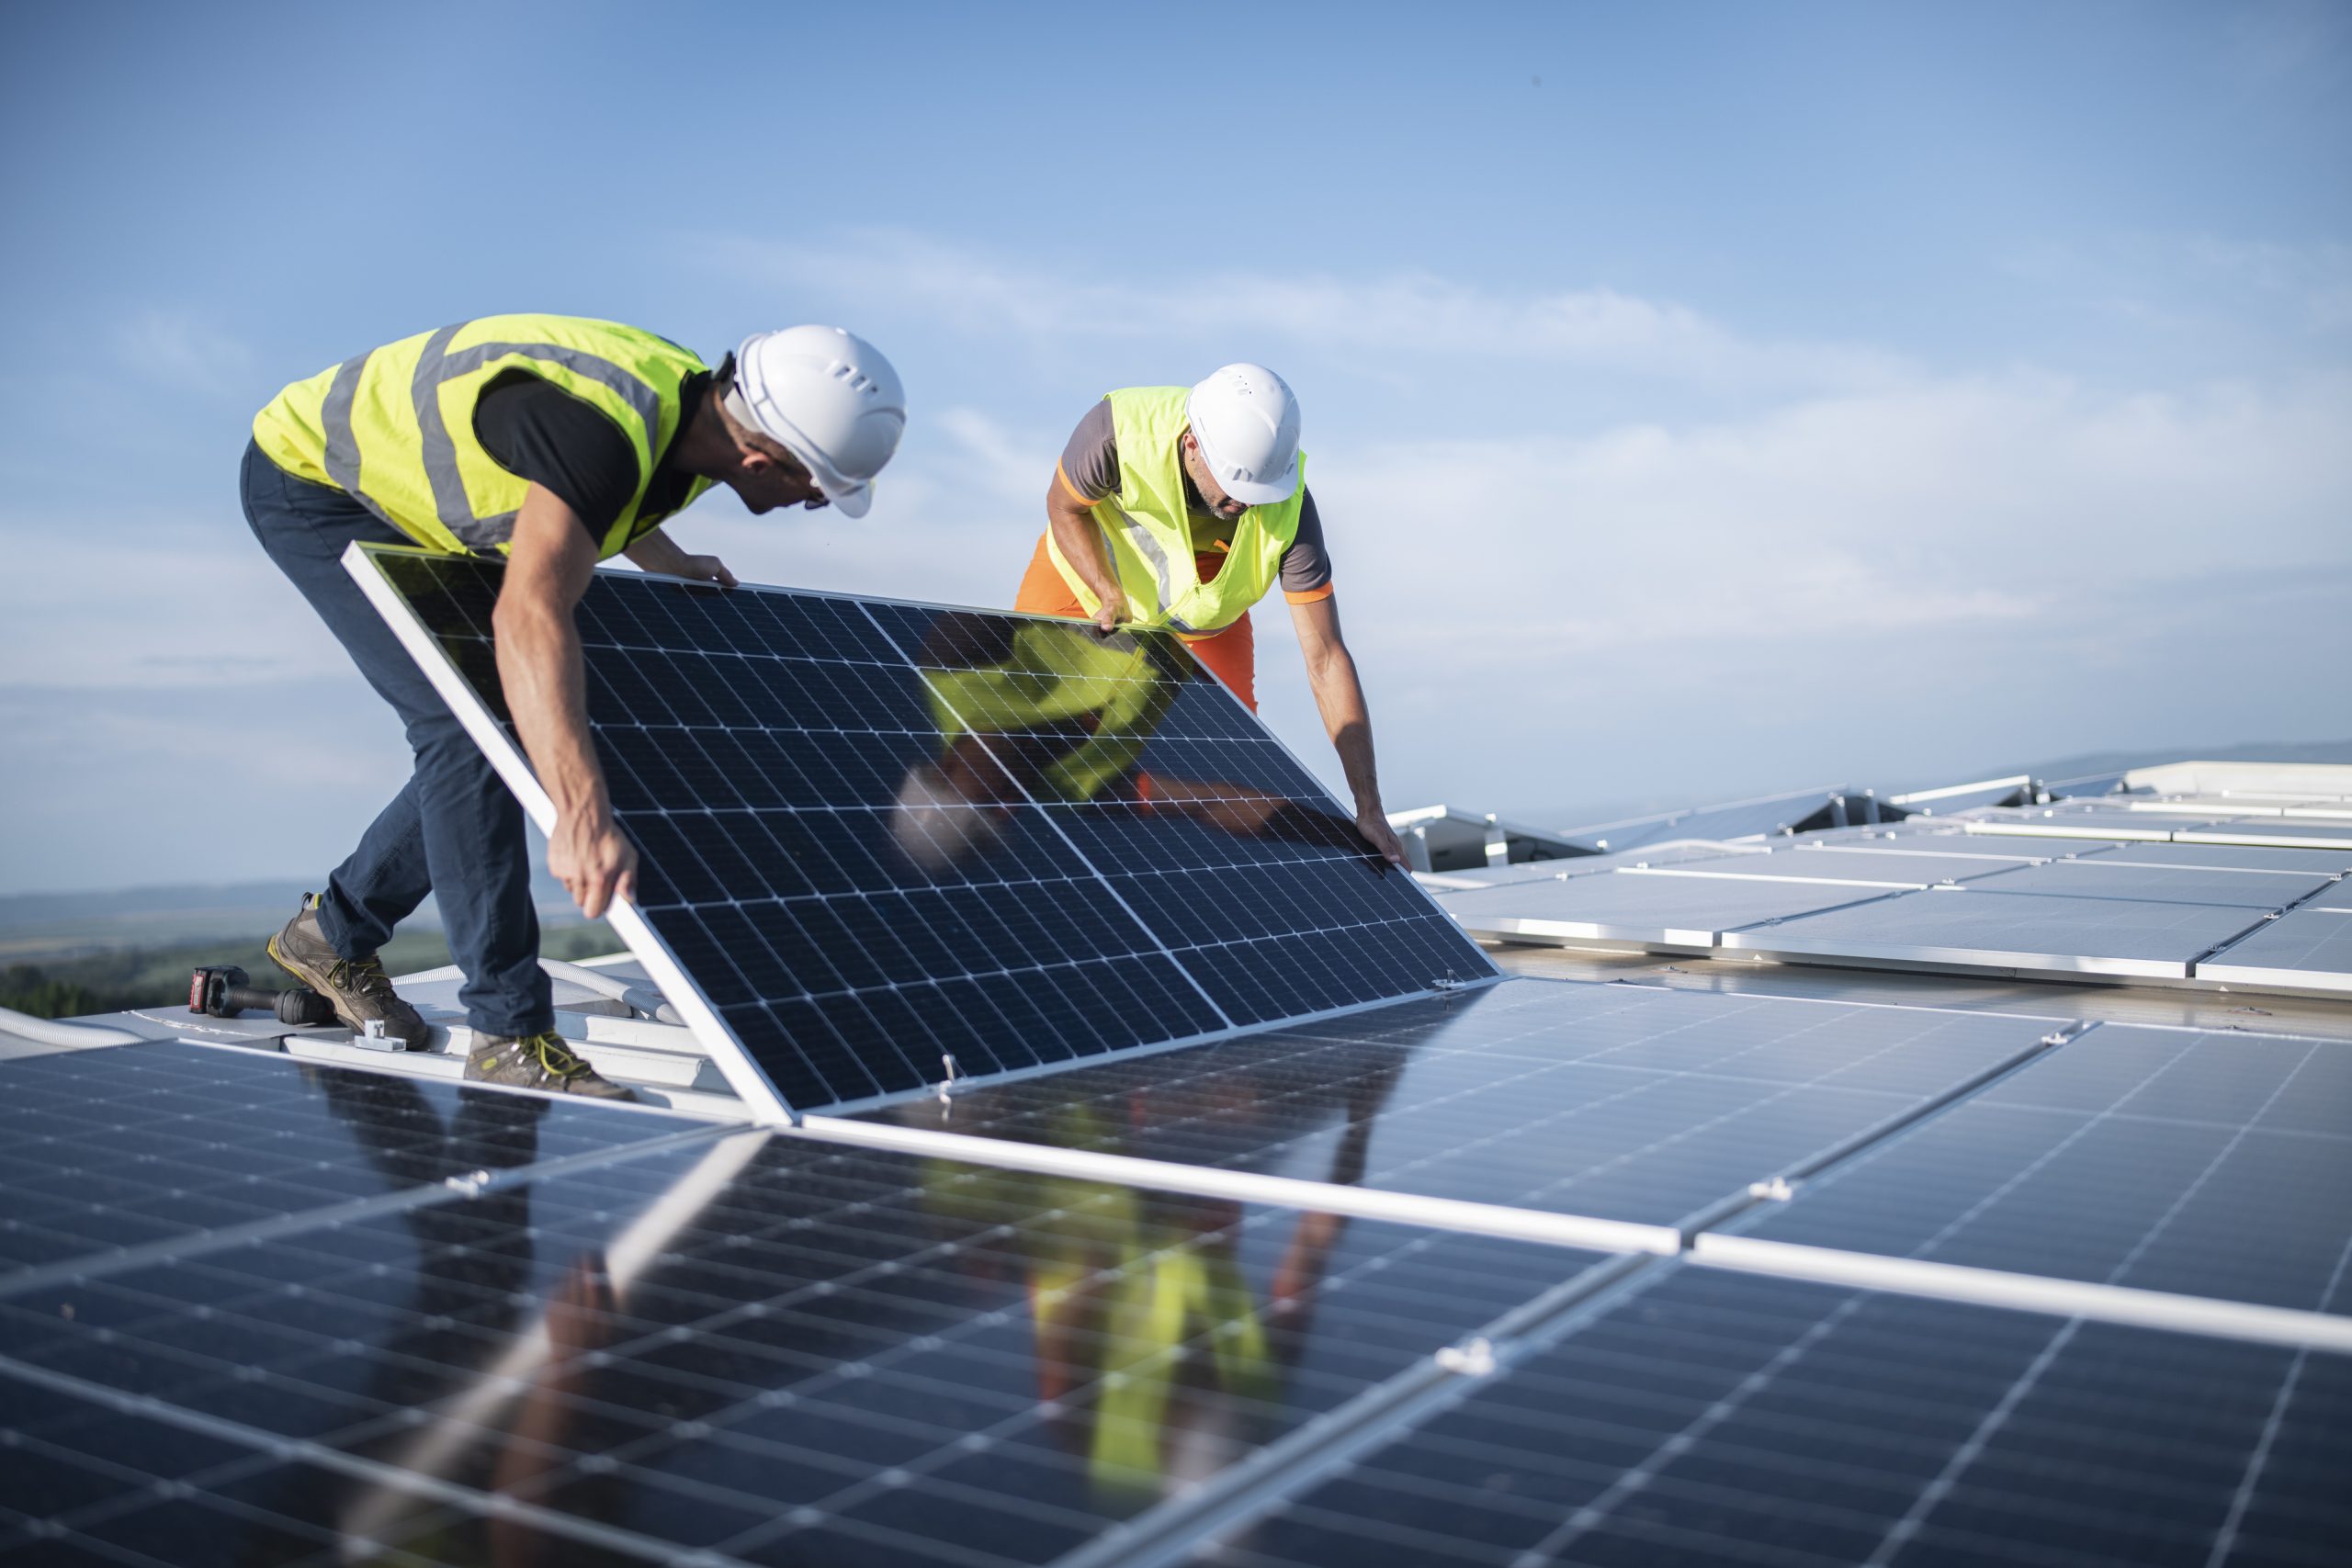 solar energy panels being installed by two construction workers